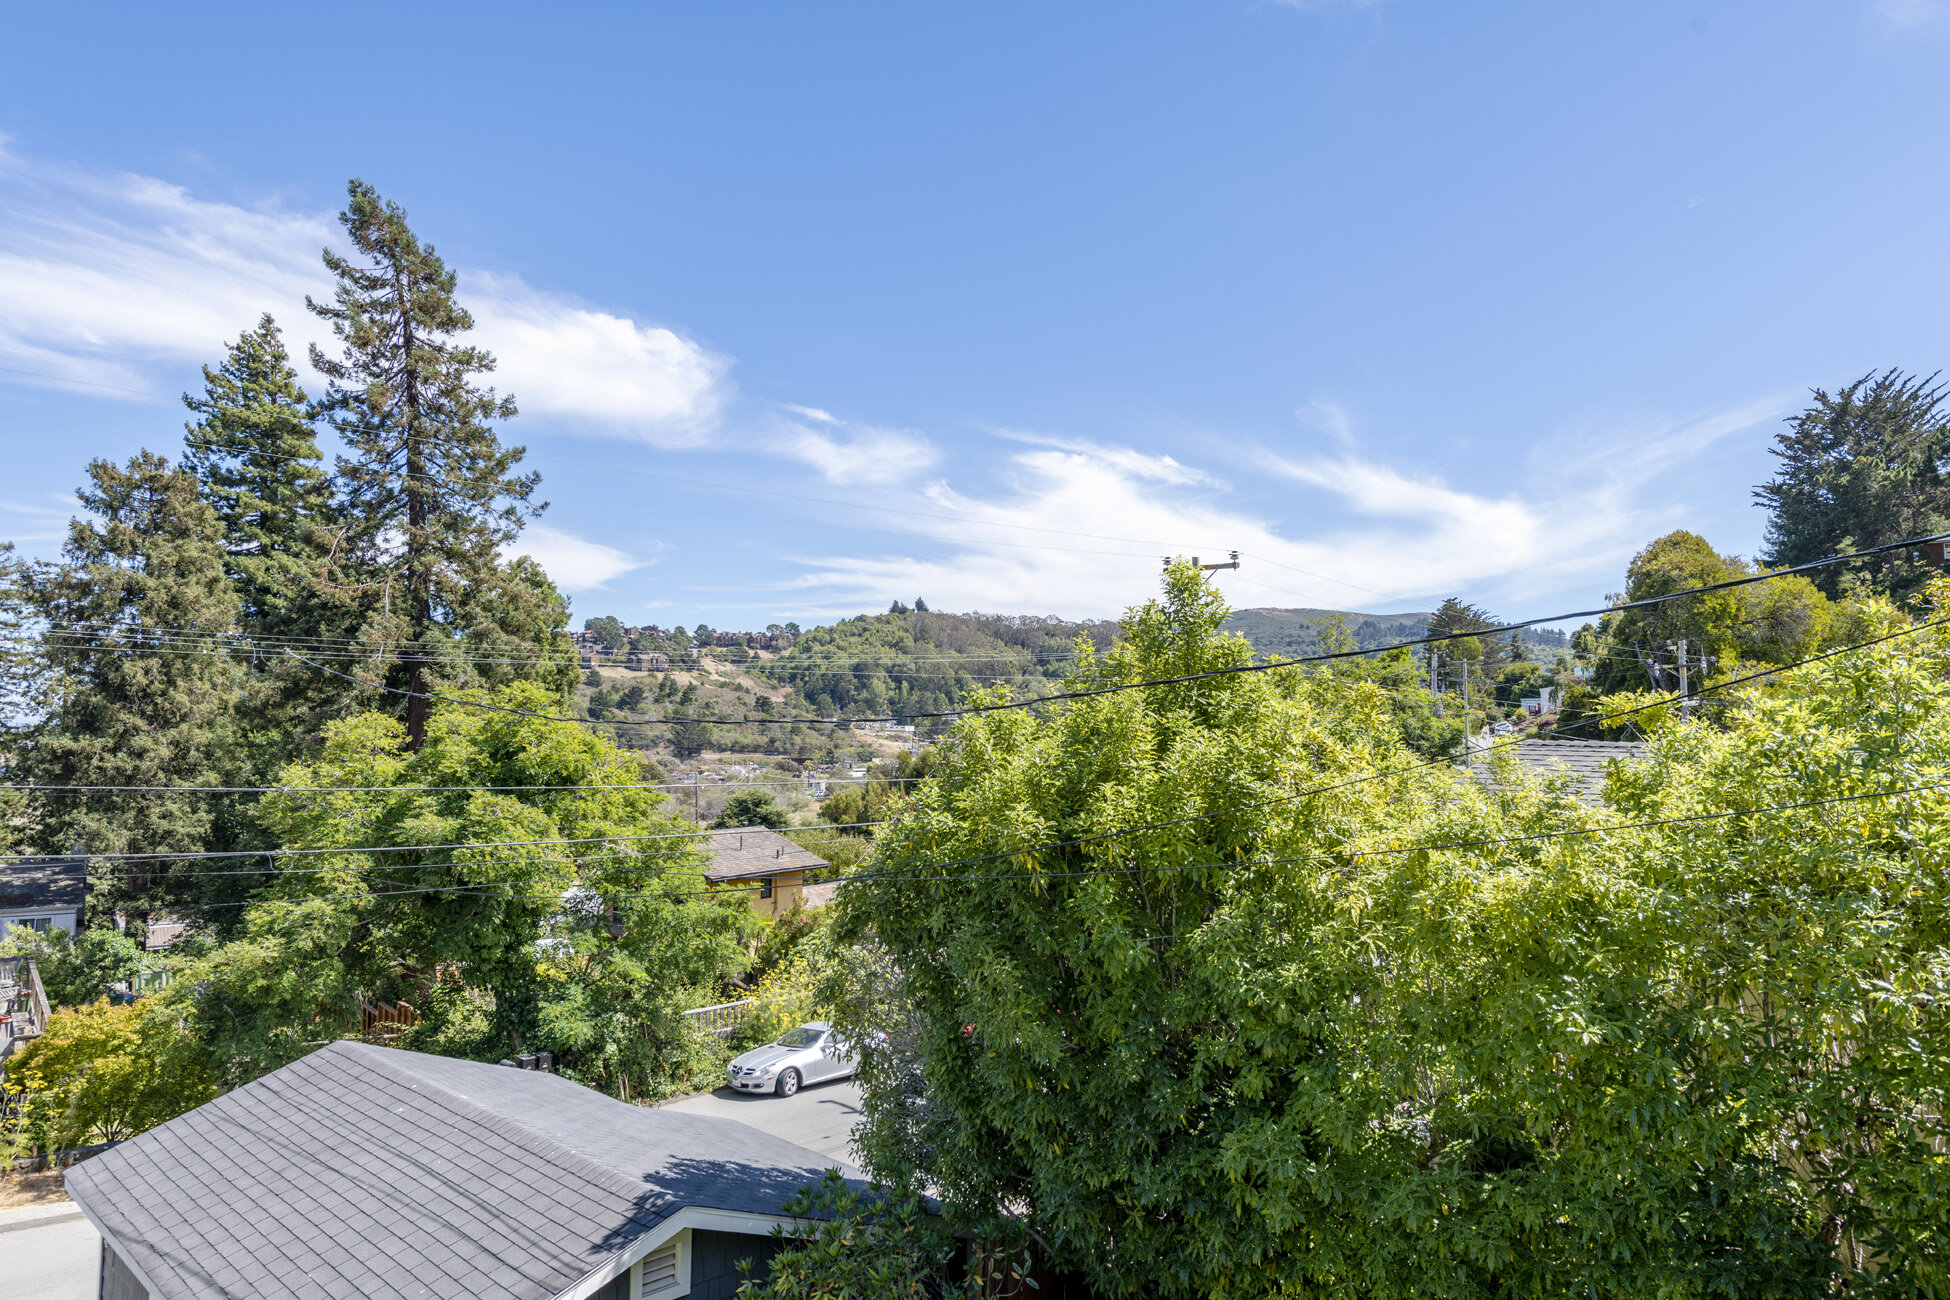 33_view2 - 216 Morning Sun Mill Valley Real Estate For Sale - Listed by Allie Fornesi Top Marin County Realtor.jpg